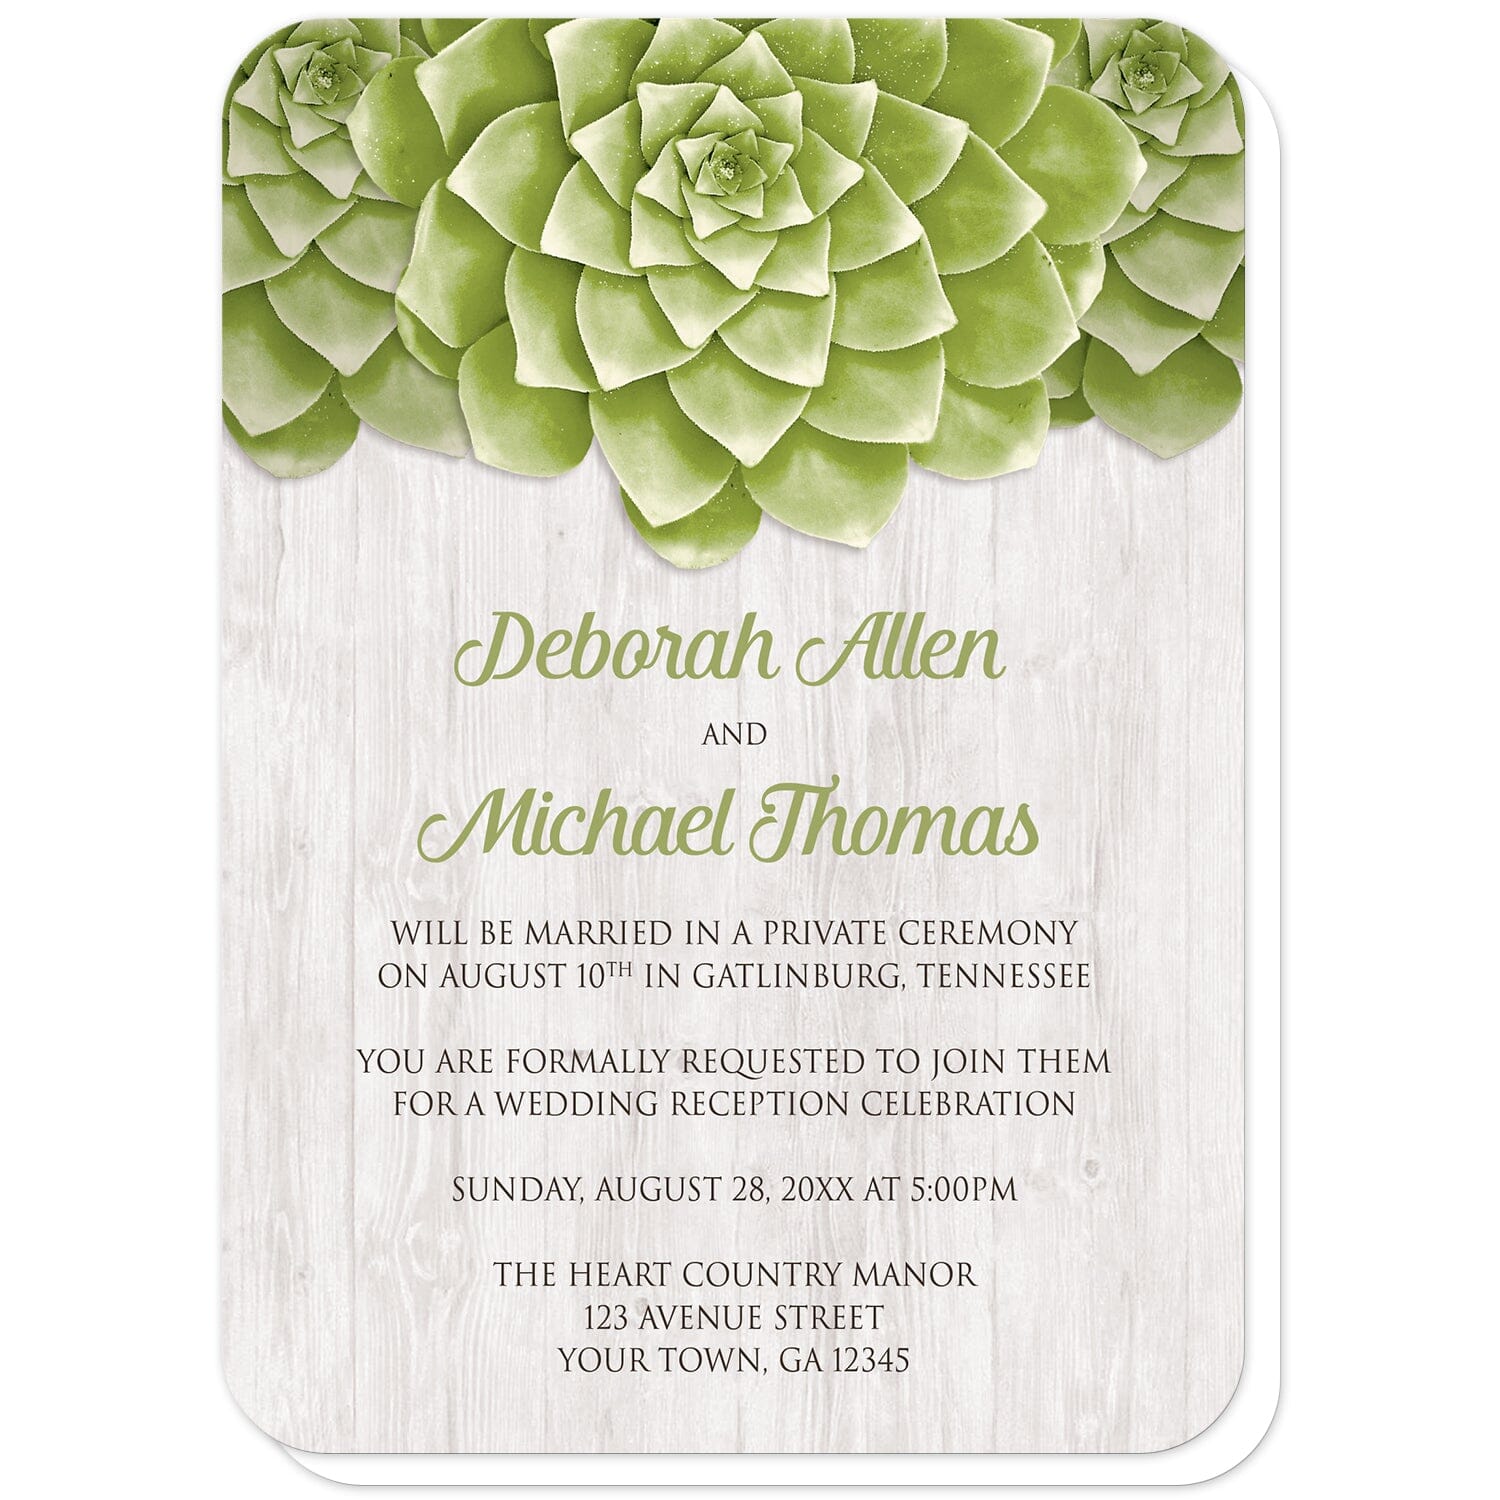 Succulent Whitewashed Wood Reception Only Invitations (with rounded corners) at Artistically Invited. Cool and fresh succulent whitewashed wood reception only invitations with three large green succulents along the top of the invitations over a rustic whitewashed wood background design. Your personalized post-wedding reception details are custom printed in green and dark brown over the whitewashed wood background below the succulents.